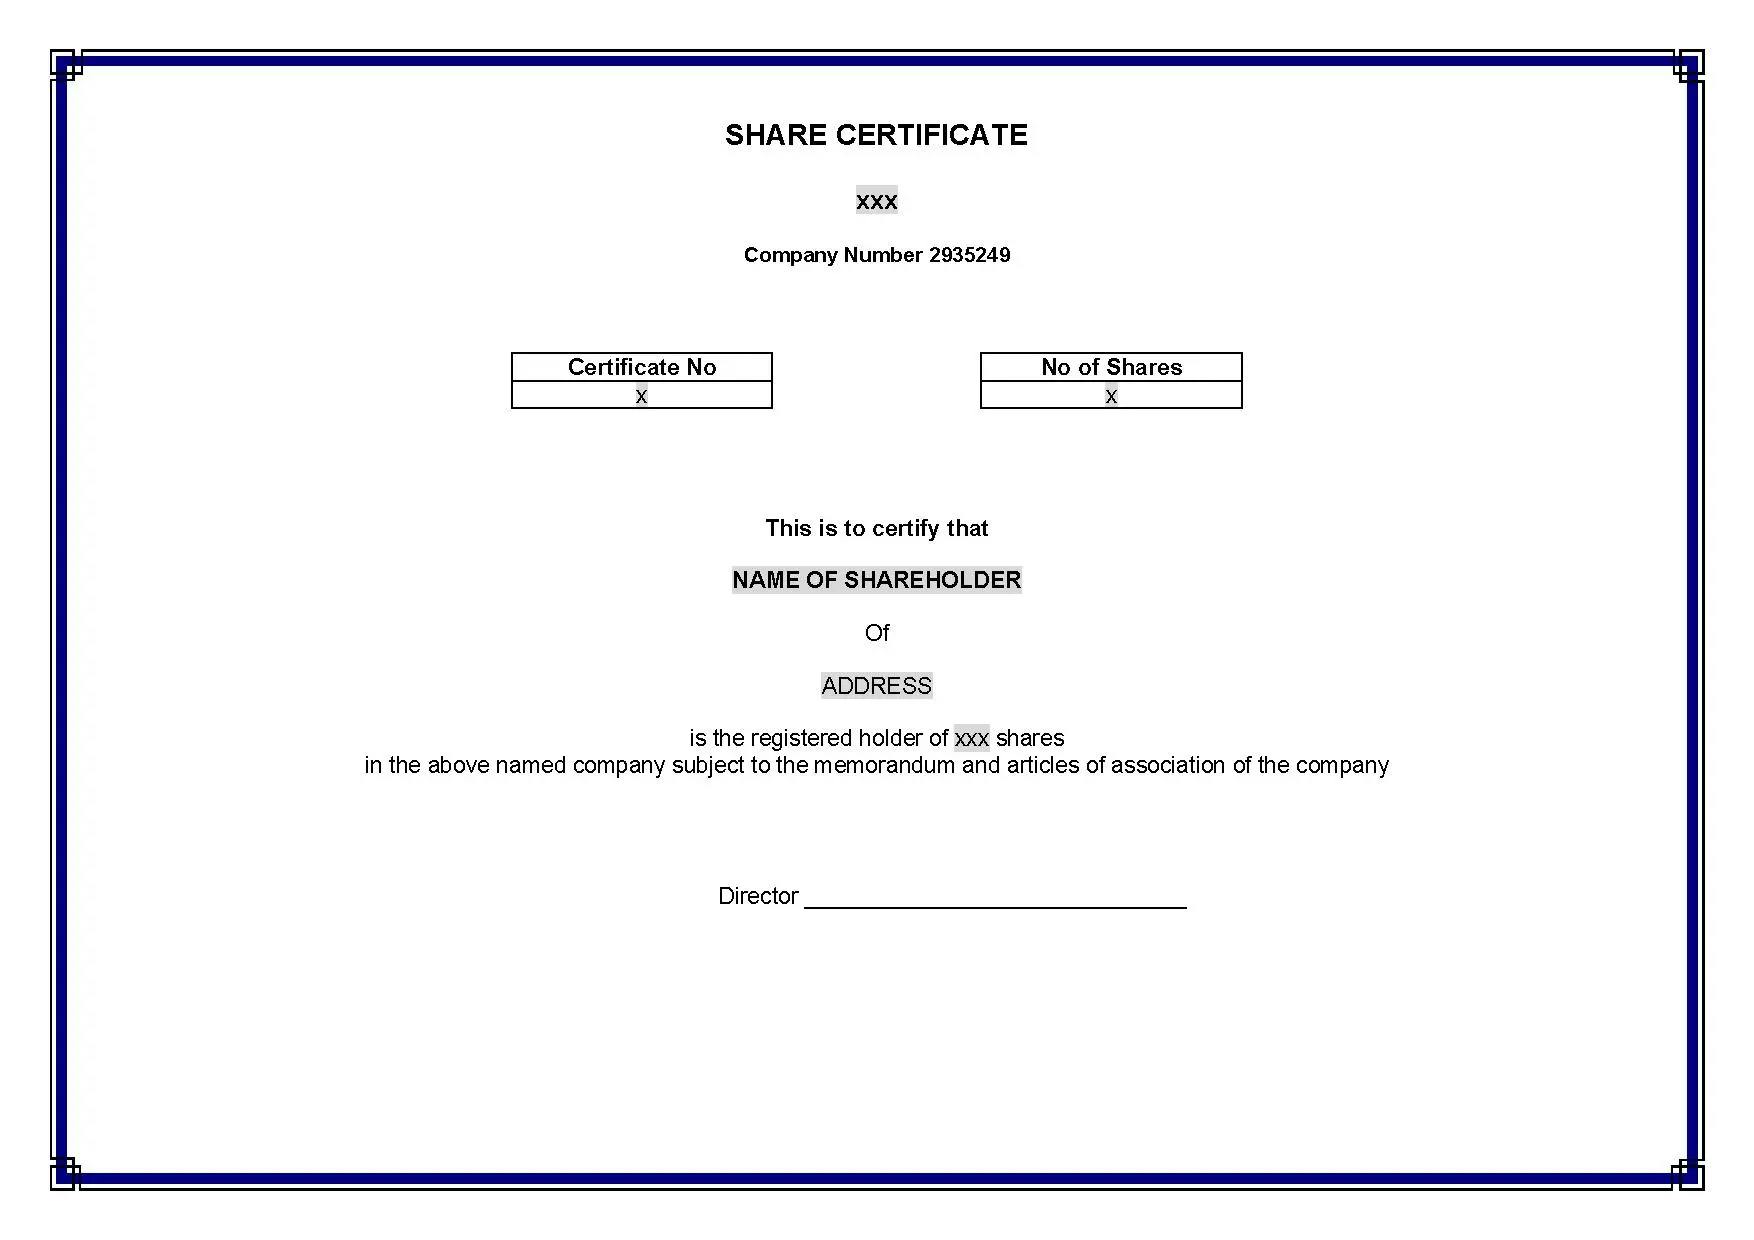 A sample Share Certificate of a company.